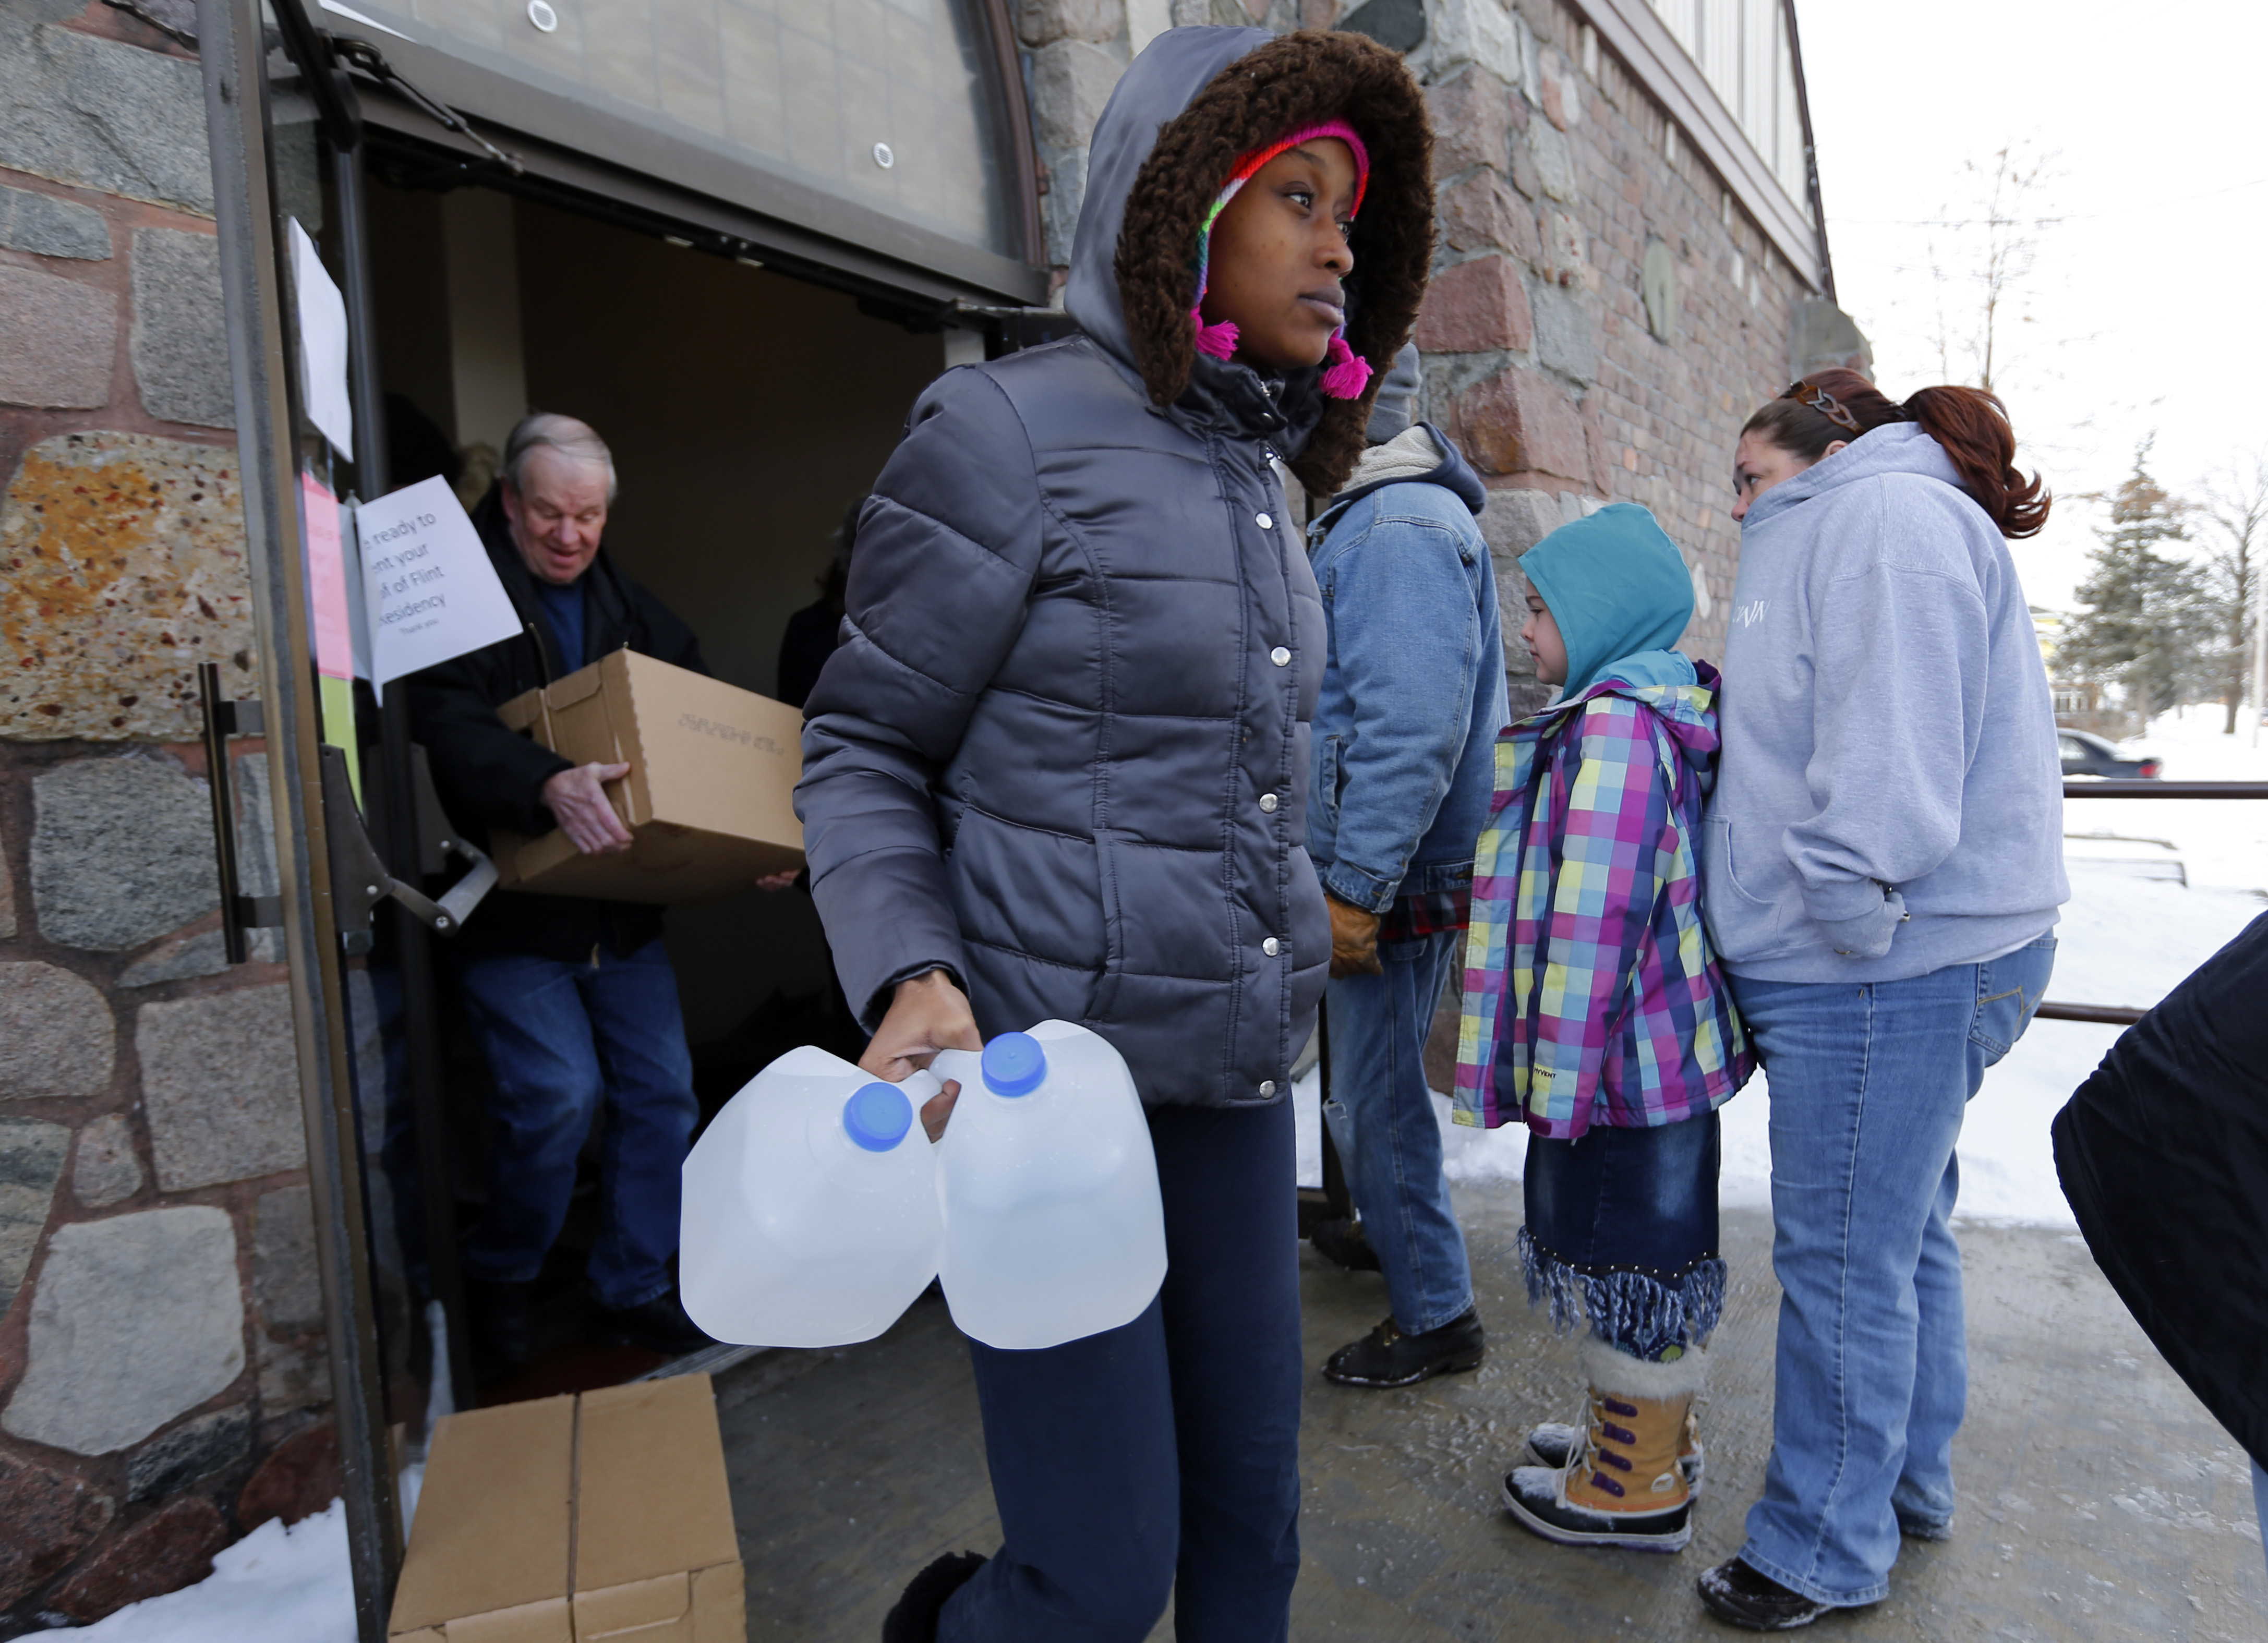 In this February 2015 photo, Genetha Campbell carries free water being distributed at the Lincoln Park United Methodist Church in Flint, Mich. (AP Photo/Paul Sancya)